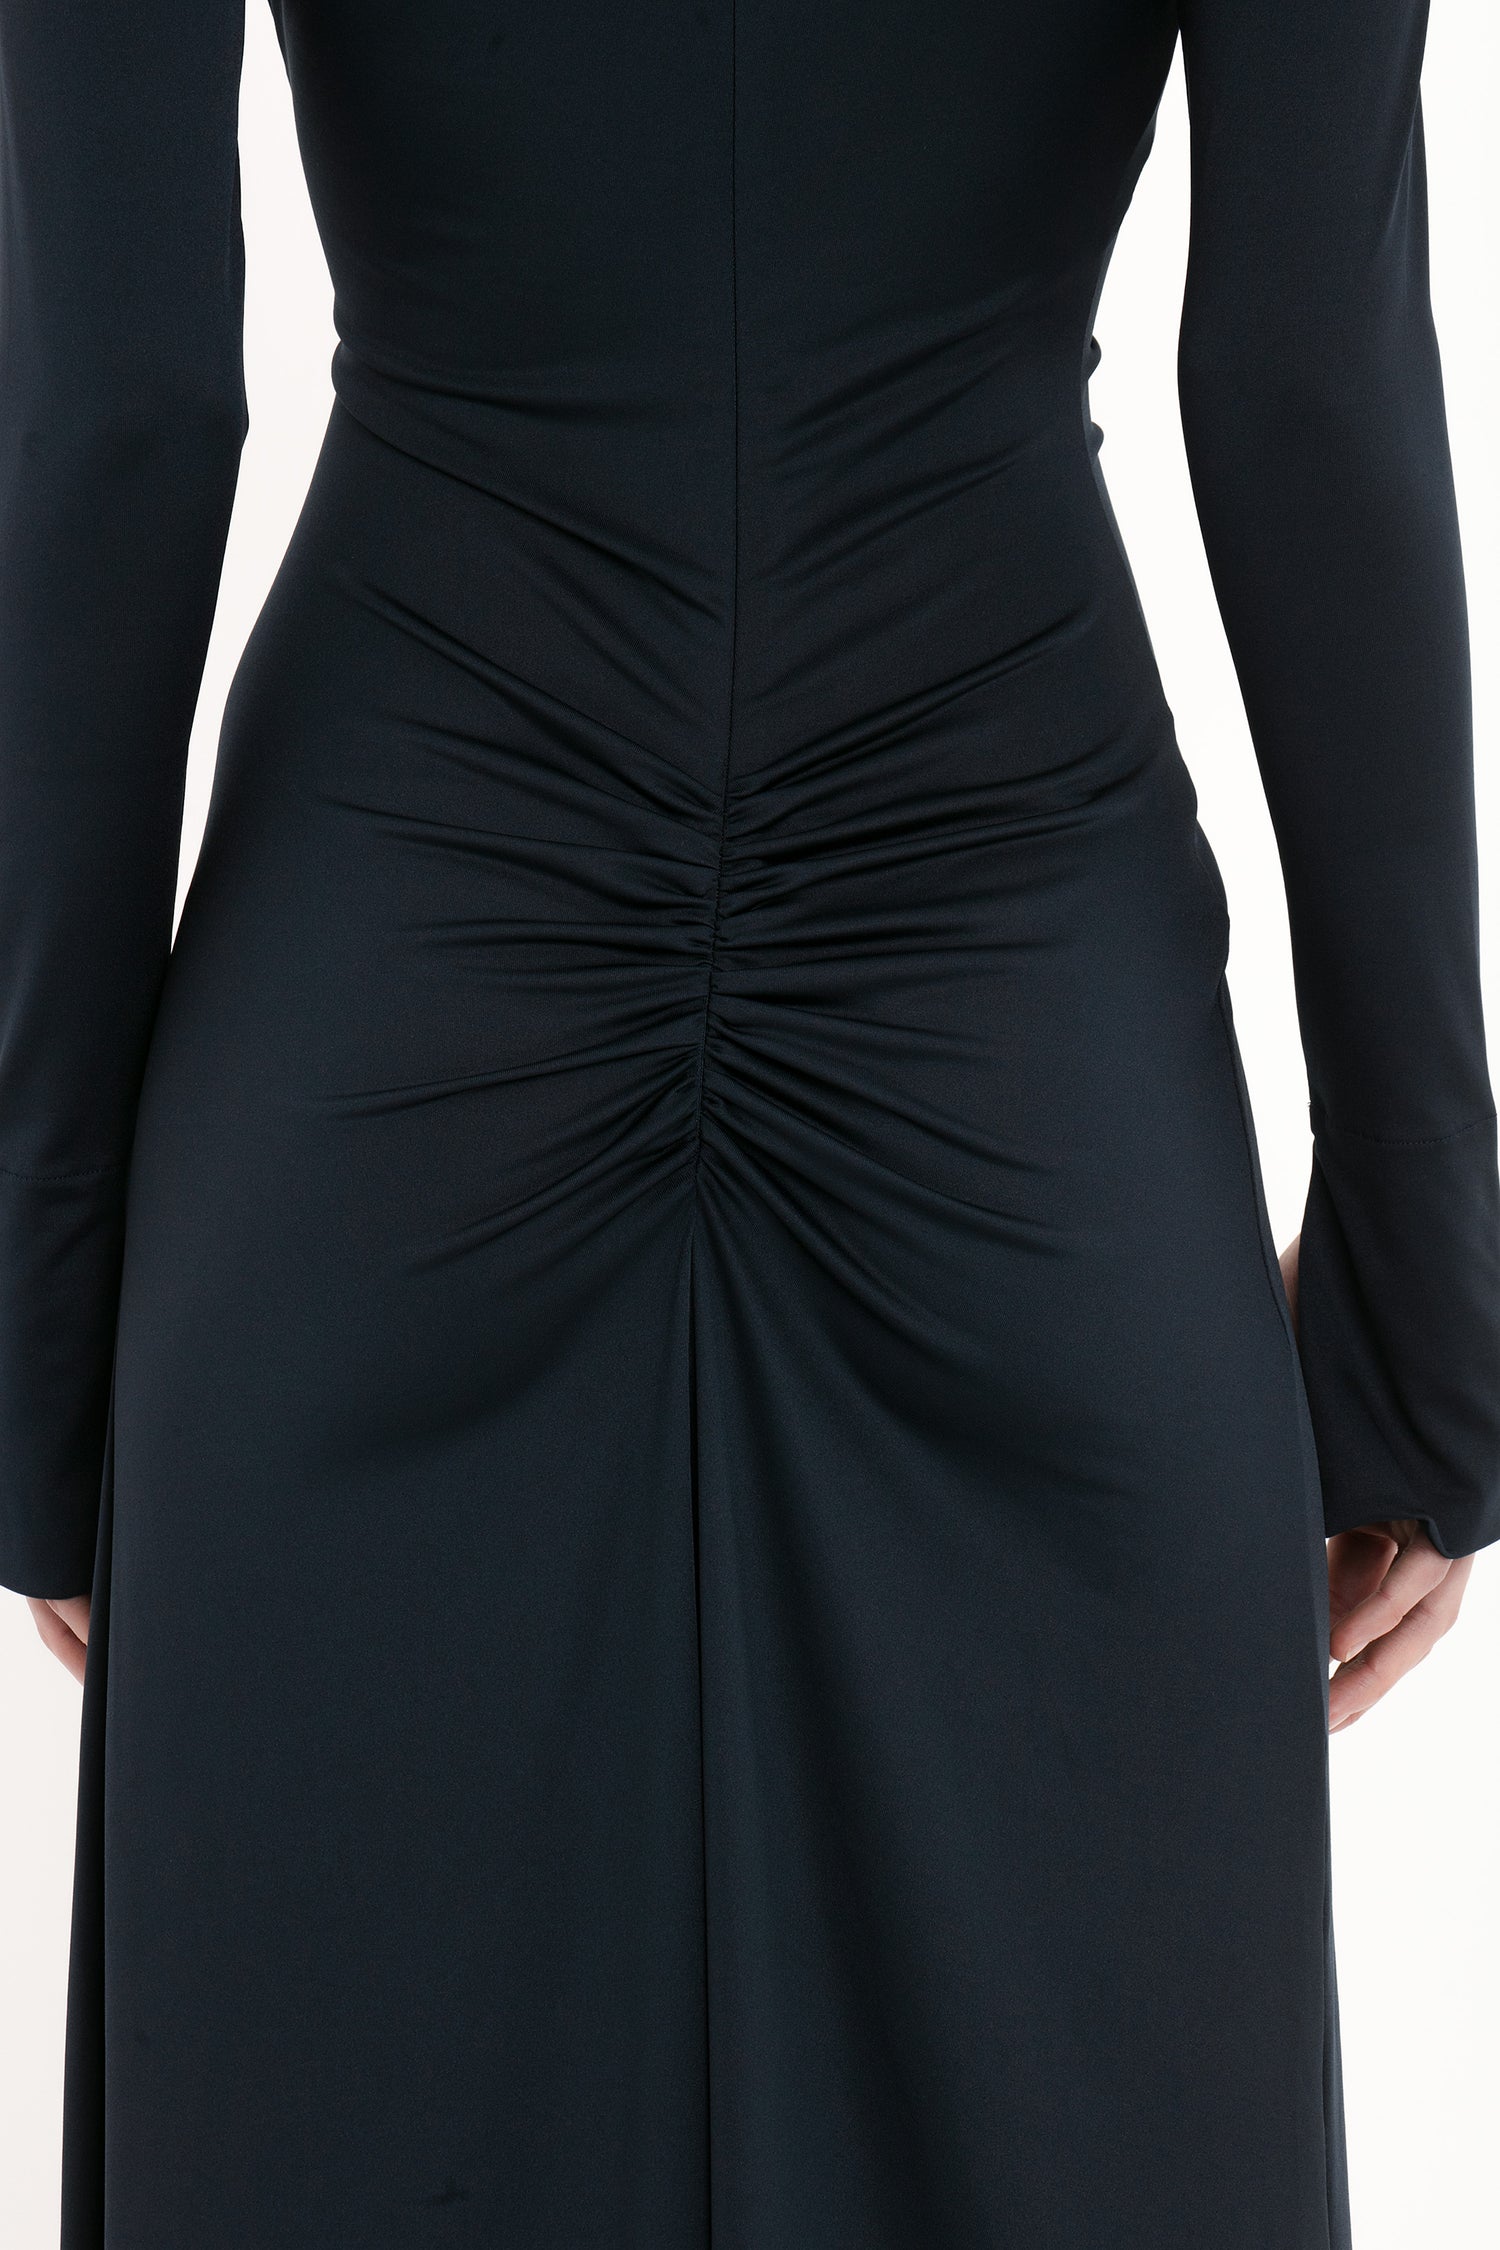 A close-up image of a person wearing a Ruched Detail Floor-Length Gown In Midnight by Victoria Beckham, with gathered and ruched detail at the back, creating a central focal point. The fabric appears to be dark and smooth, embodying understated glamour.